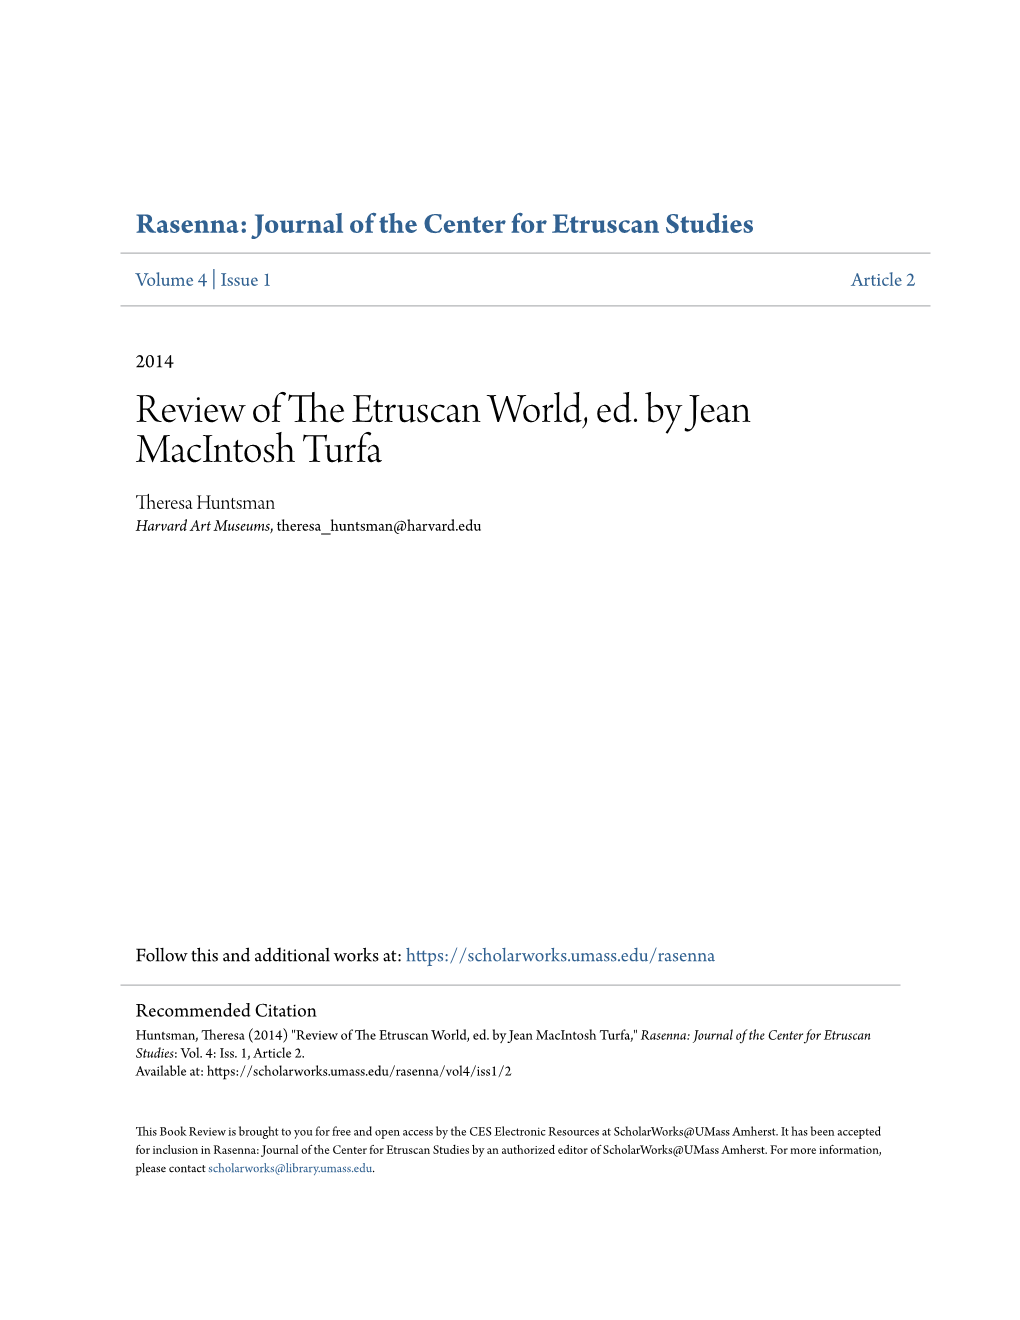 Review of the Etruscan World, Ed. by Jean Macintosh Turfa